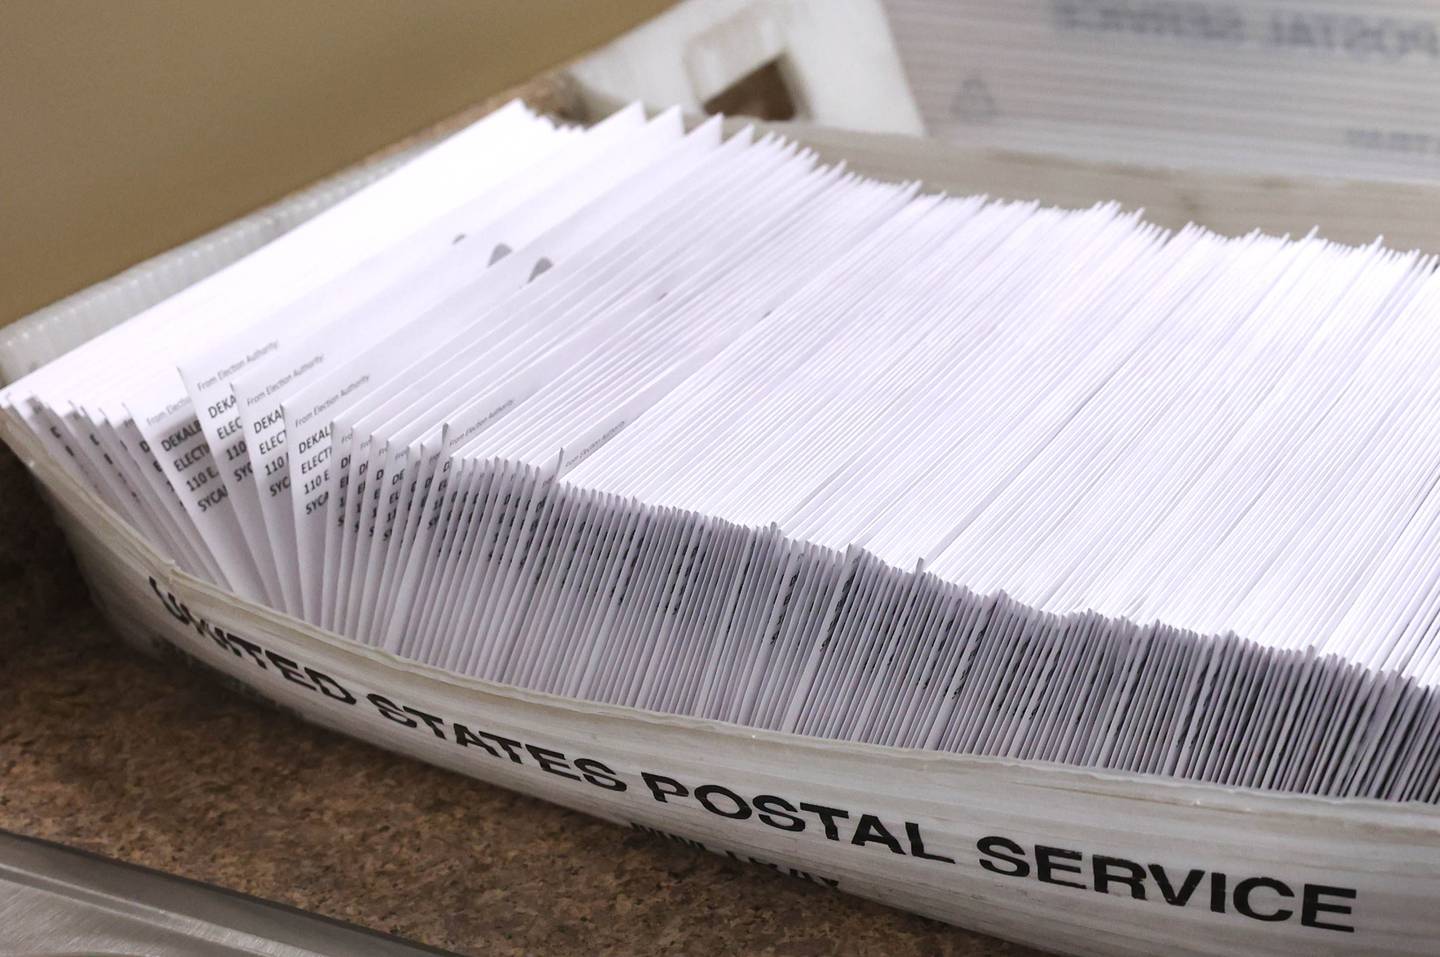 Vote-by-mail ballots are ready to send Wednesday, Feb. 22, 2023, in the DeKalb County Administration Building in Sycamore. Ballots will be sent out Thursday, Feb. 23.